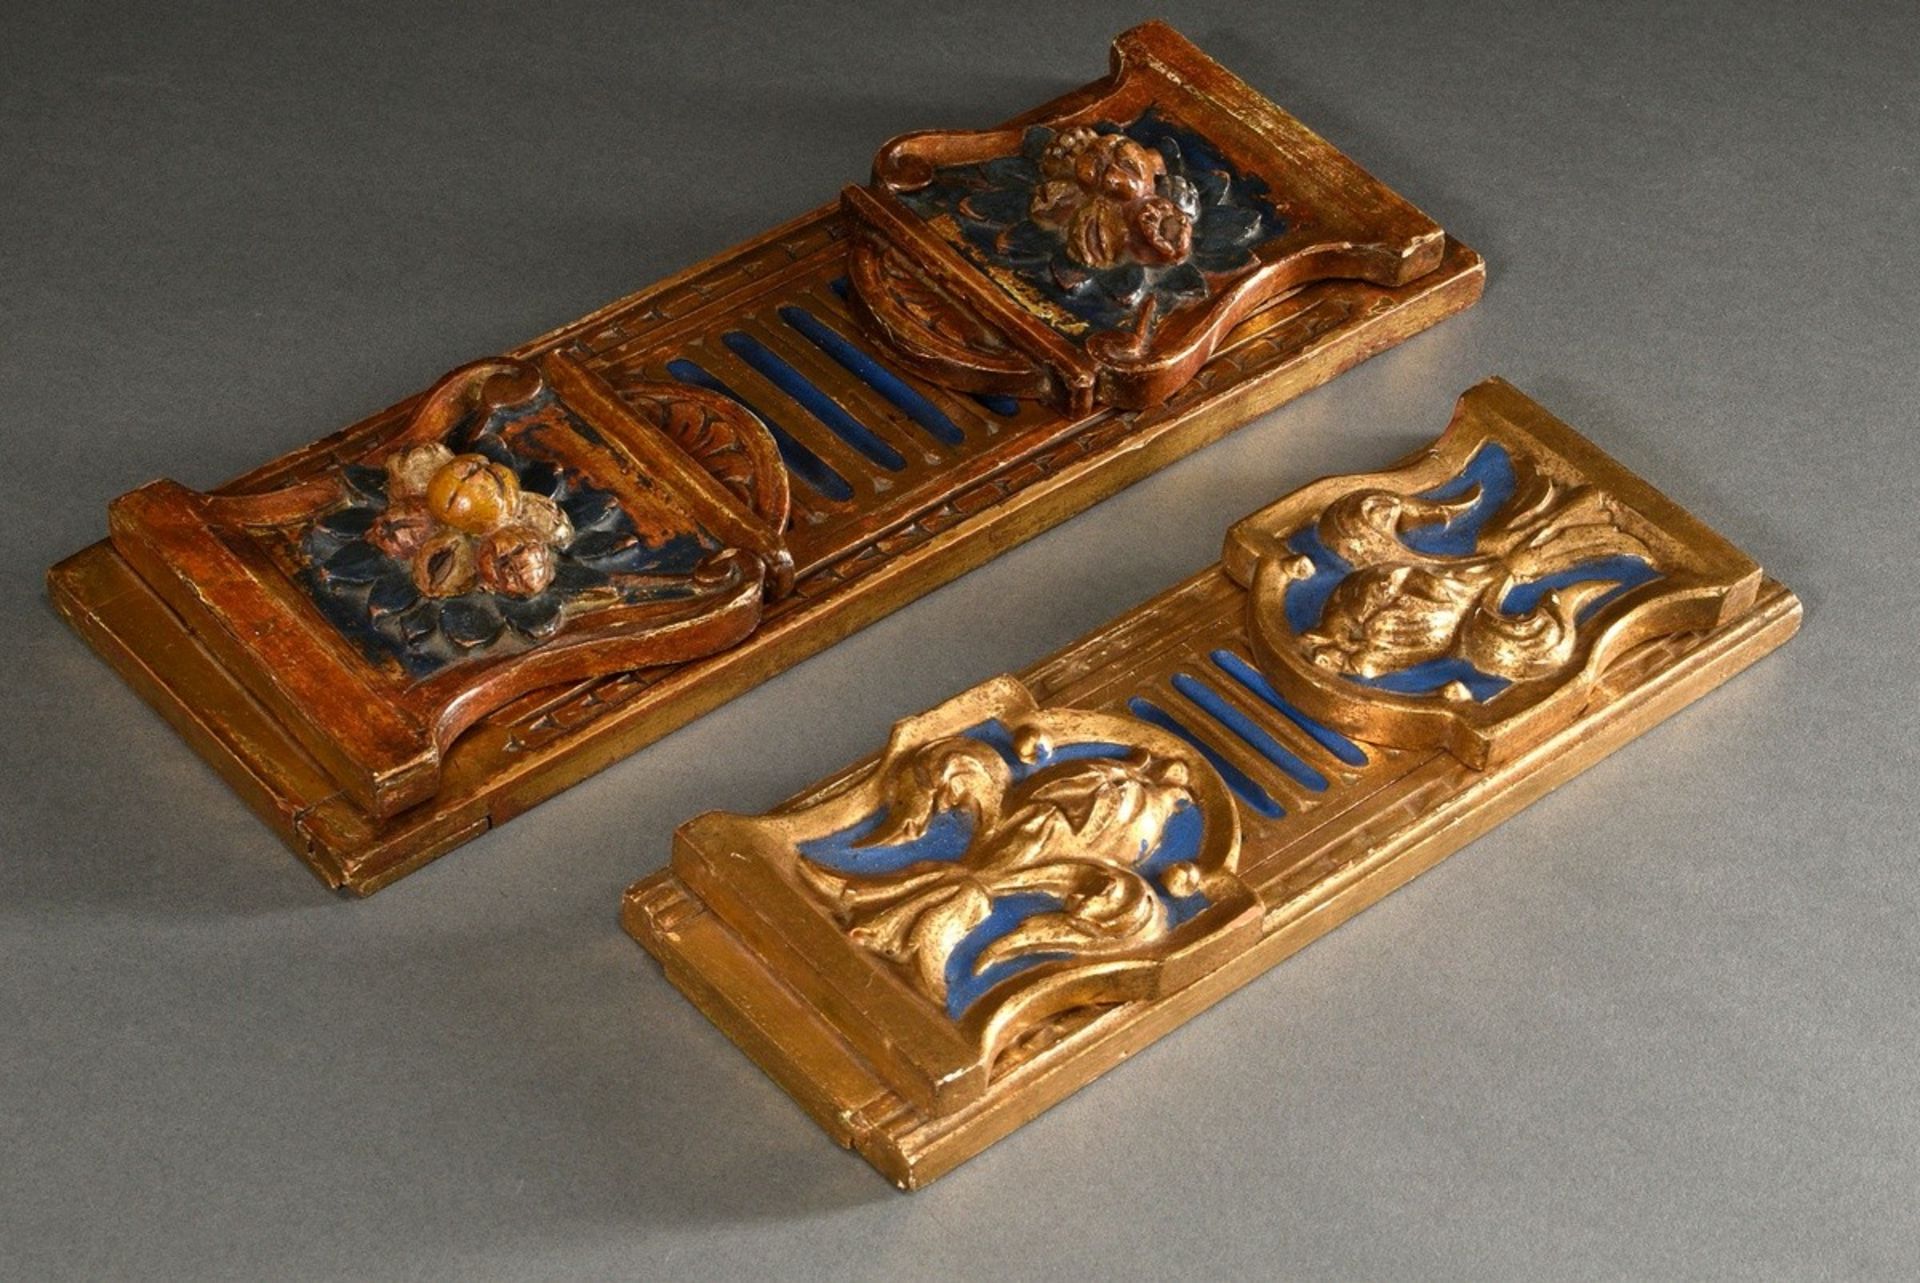 2 various size-adjustable bookends, carved wood, coloured and gilded, Italy early 20th century, 41. - Image 5 of 5